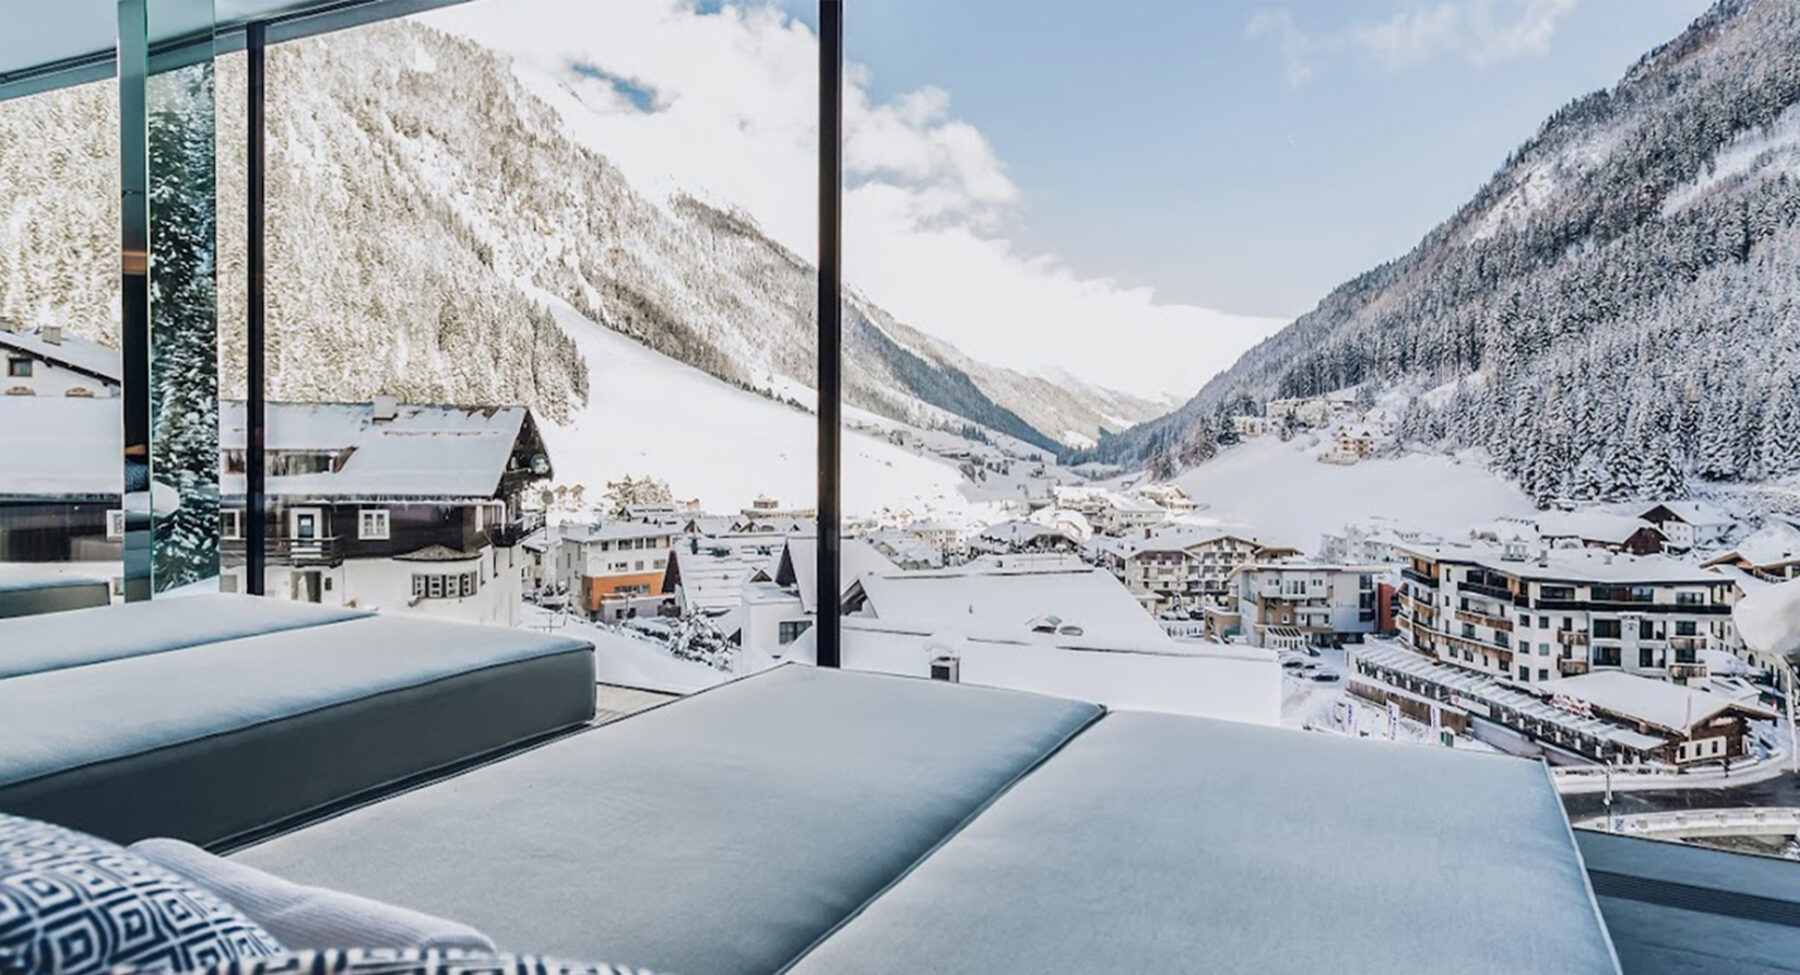 View from a luxury ski hotel in Austria